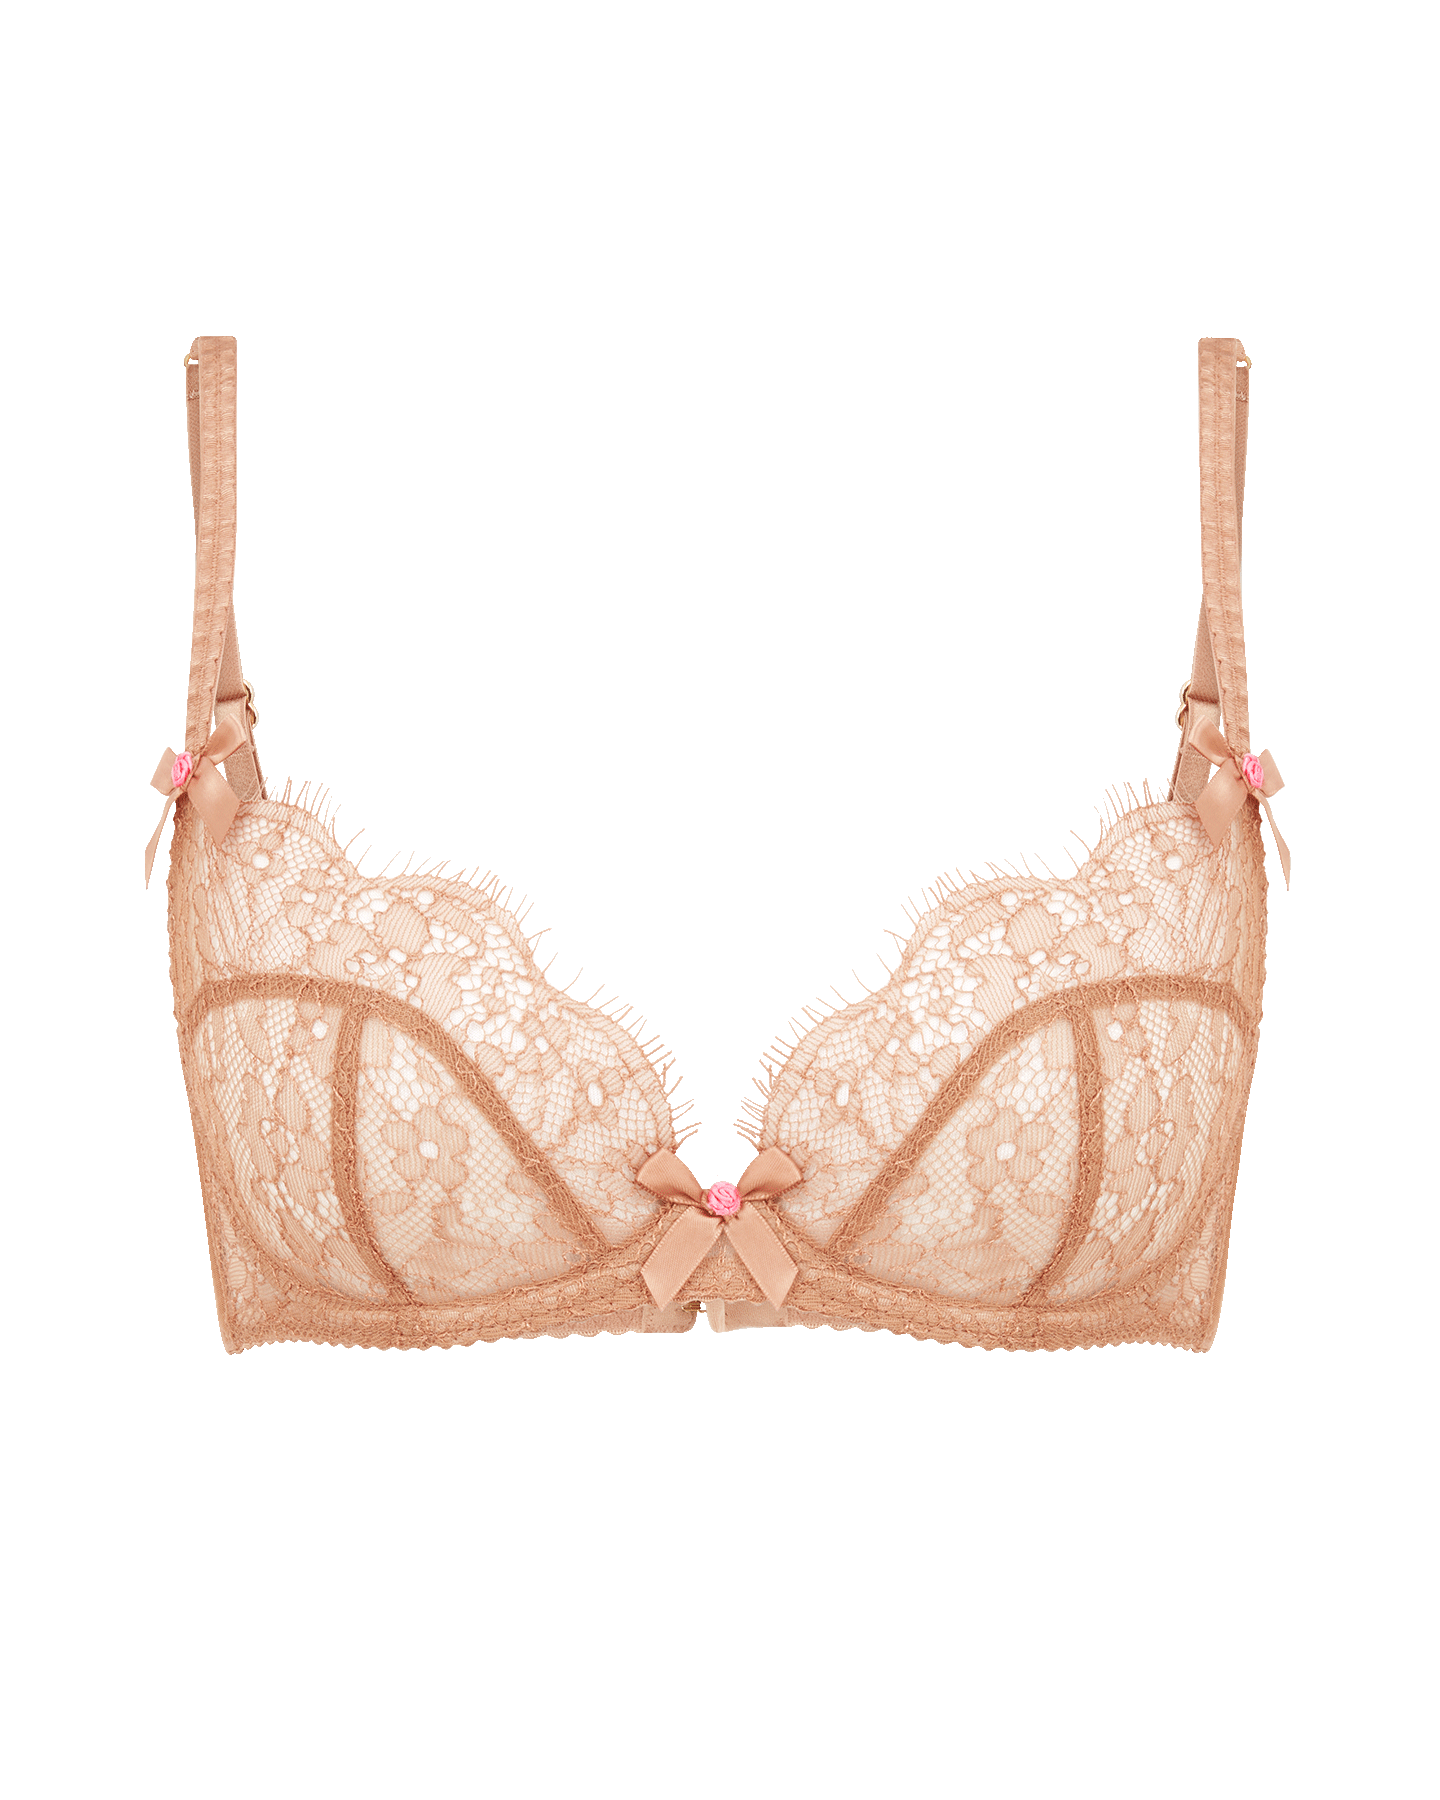 Lorna Lace Plunge Underwired Bra in Praline | By Agent Provocateur